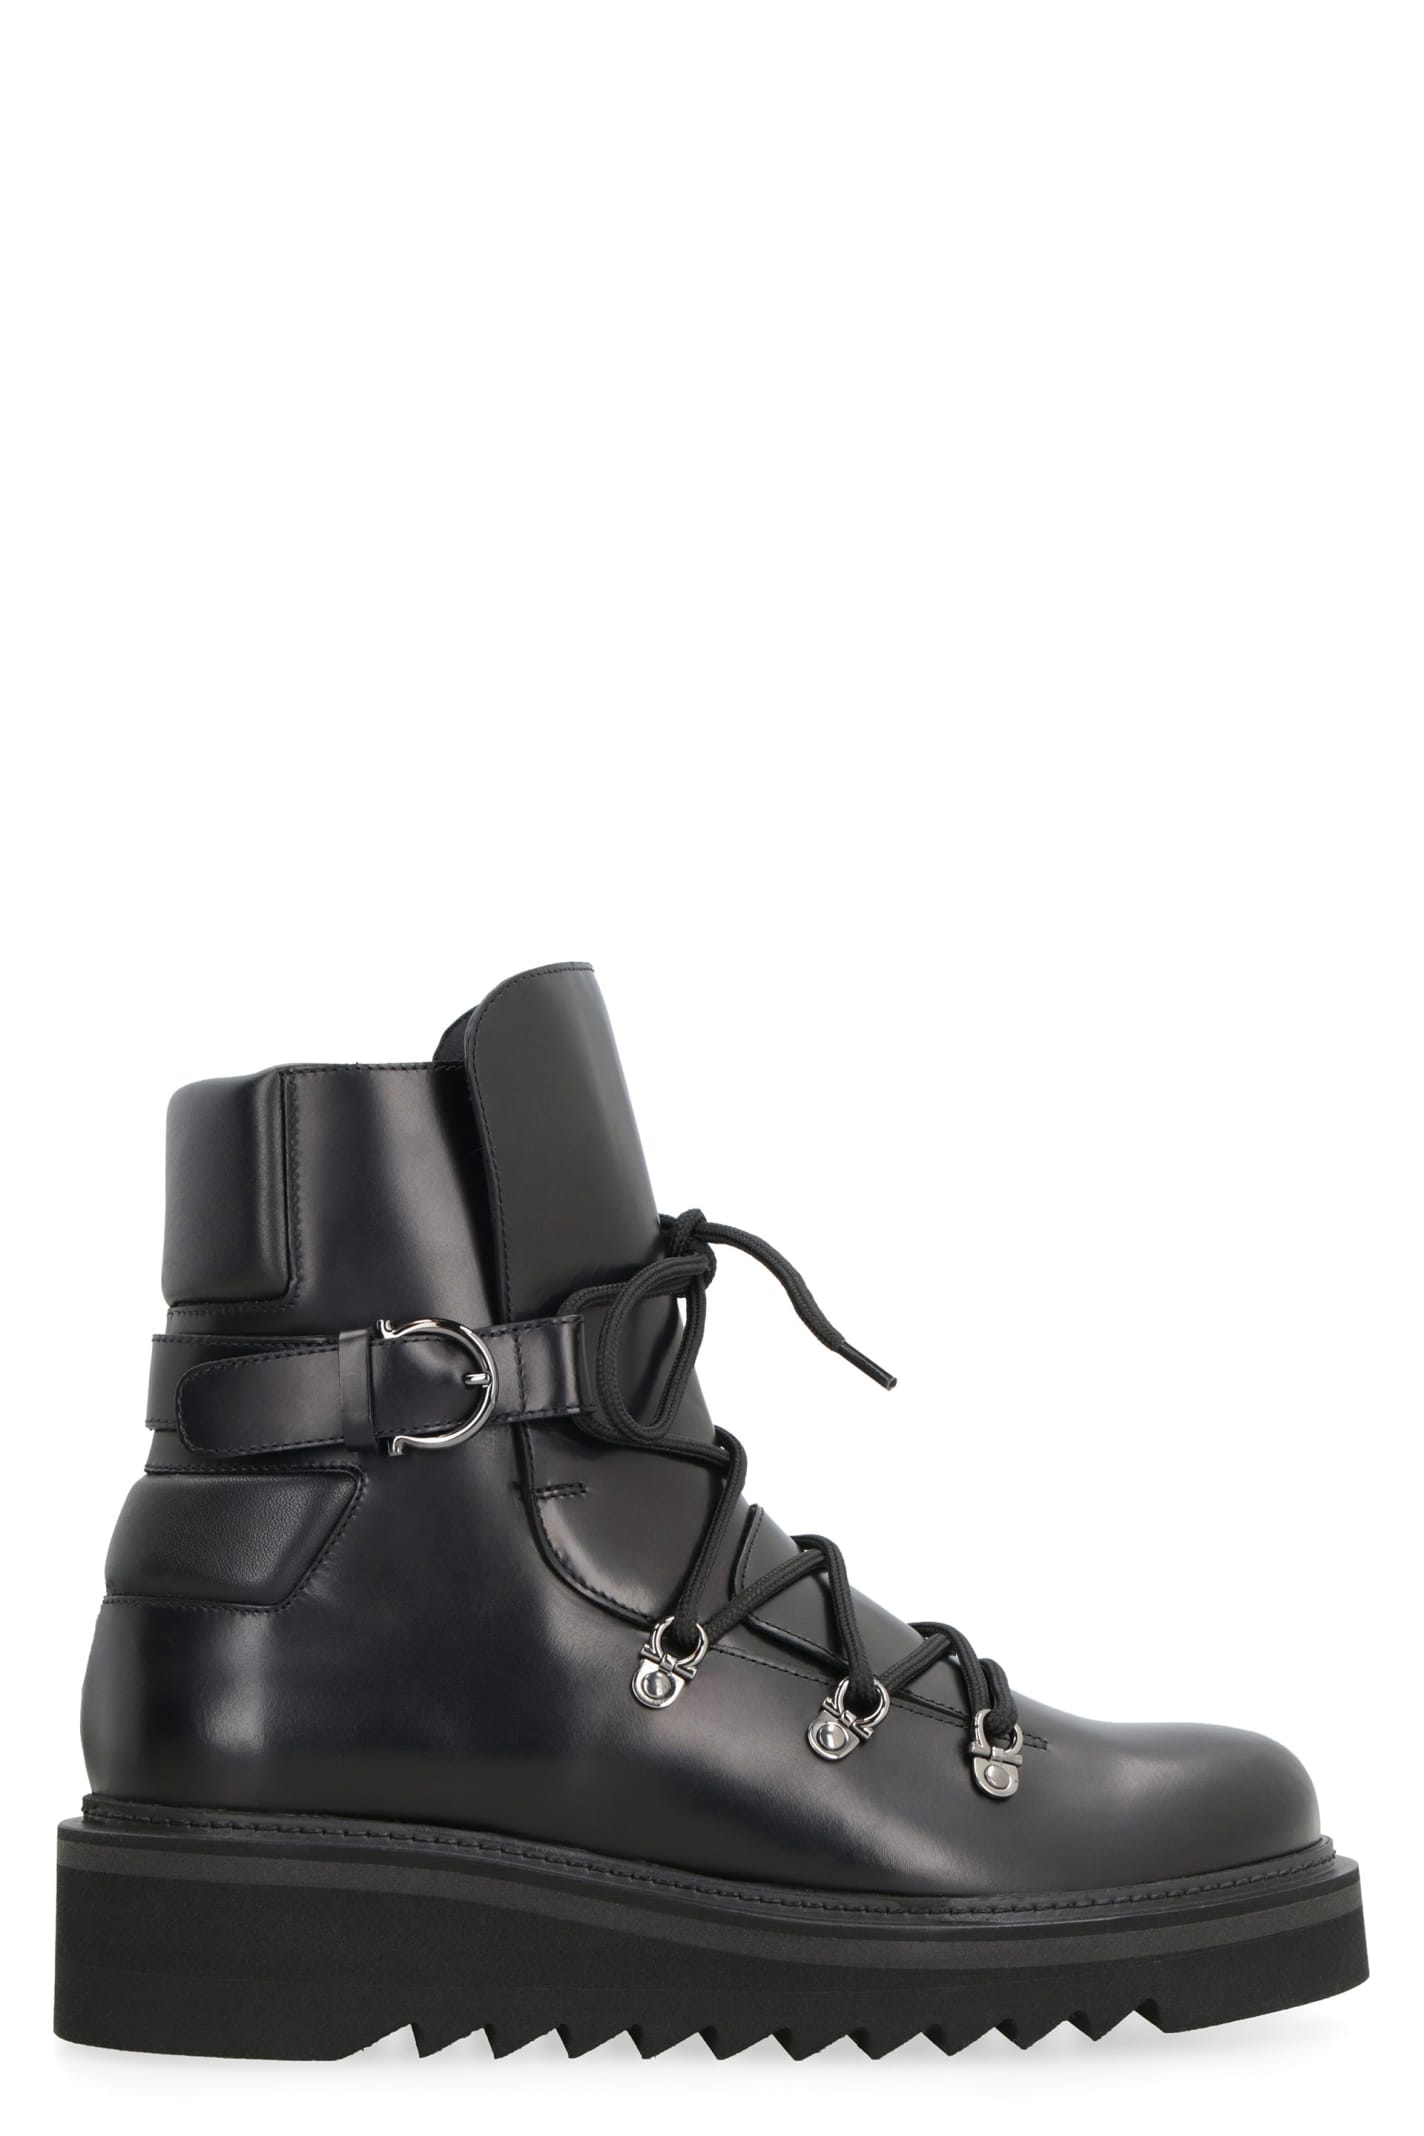 Ferragamo Elimo Leather Ankle Boots